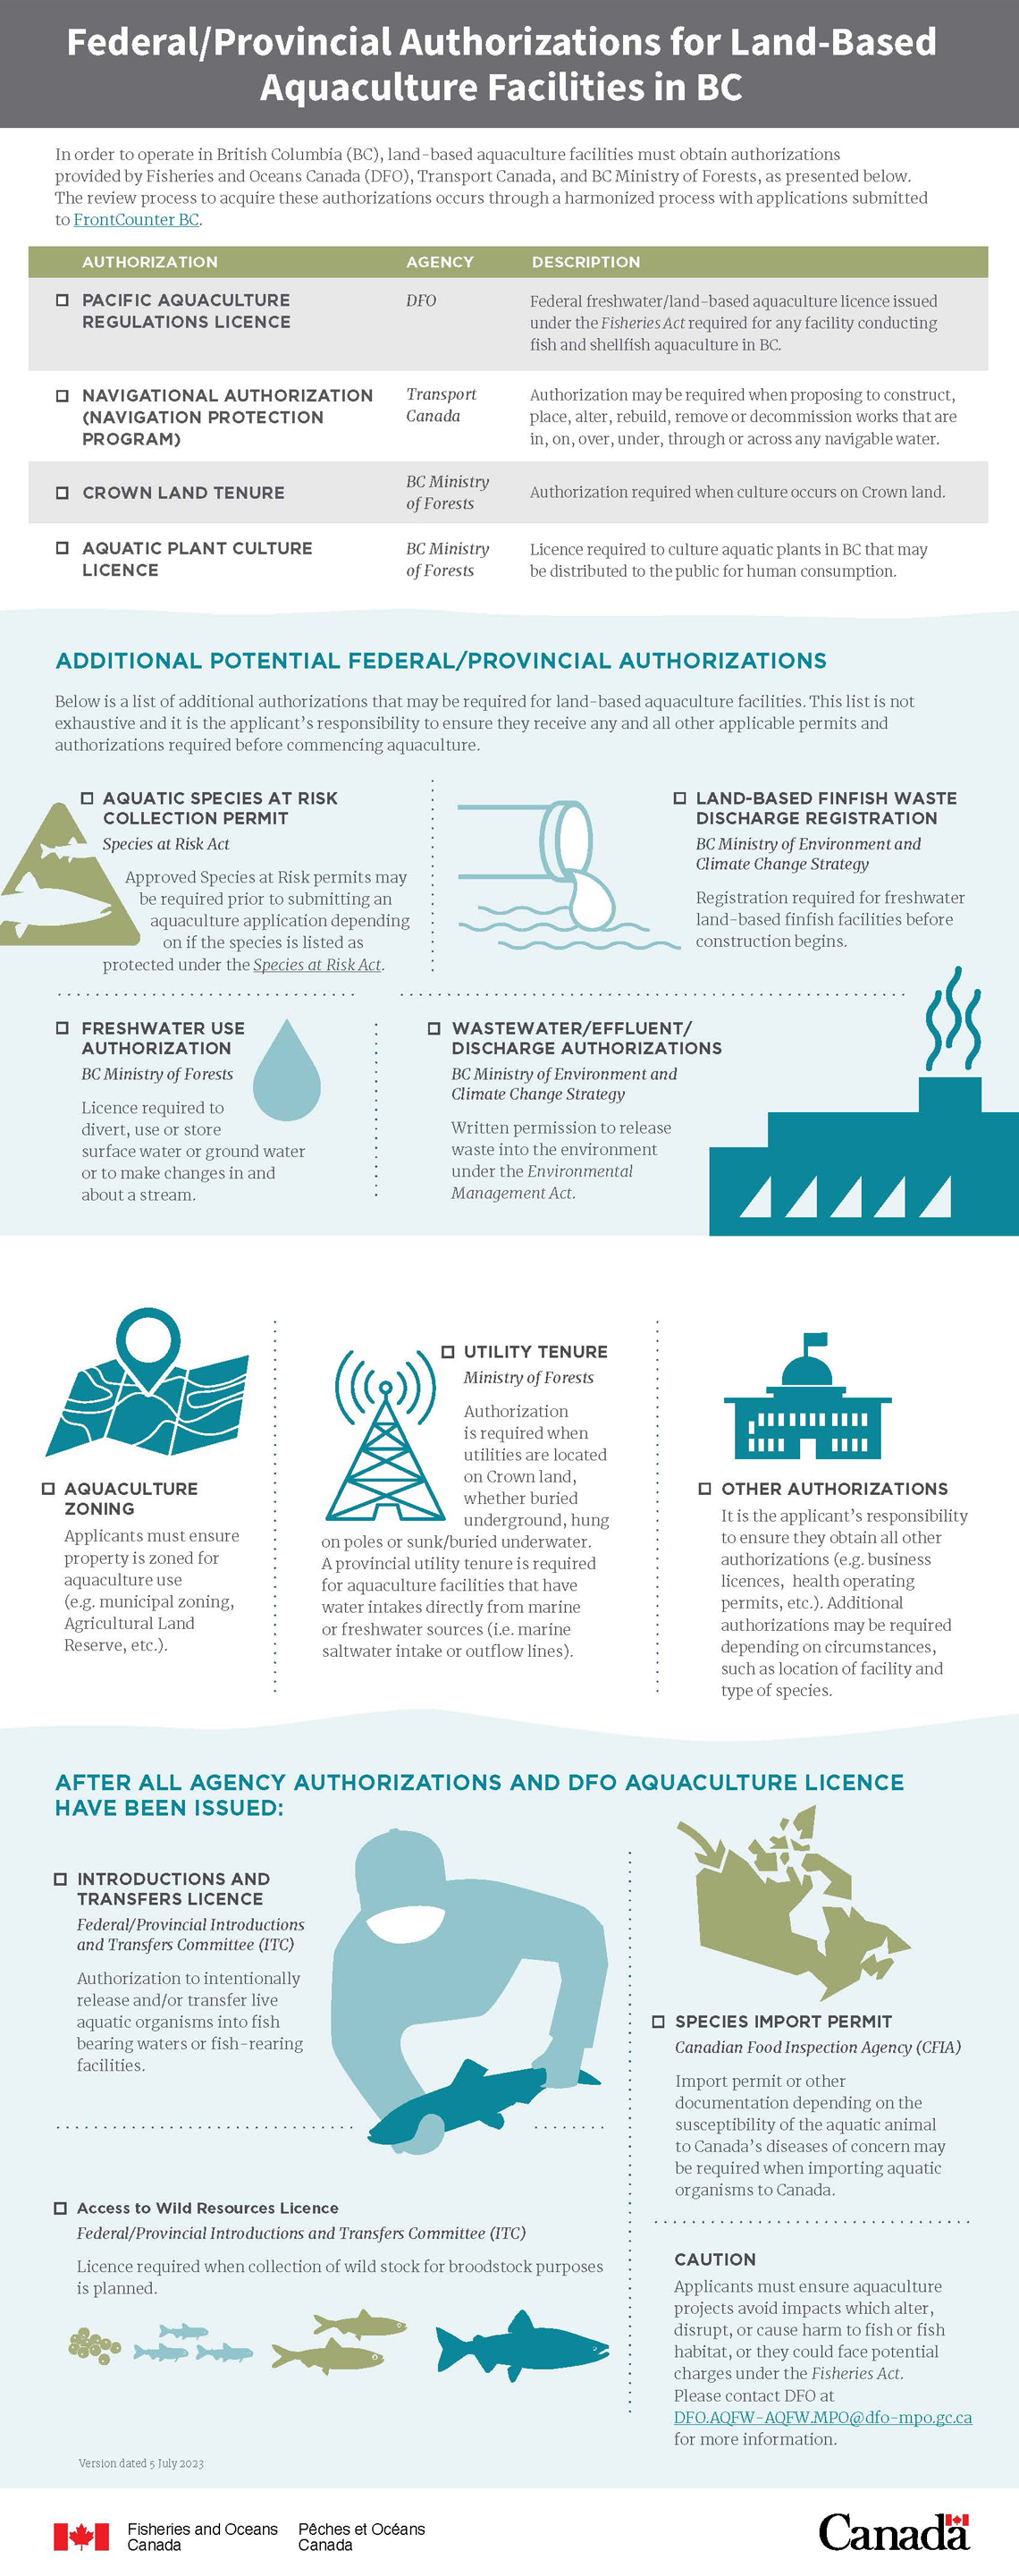 Infographic: Federal/provincial authorizations for land-based aquaculture facilities in B.C.